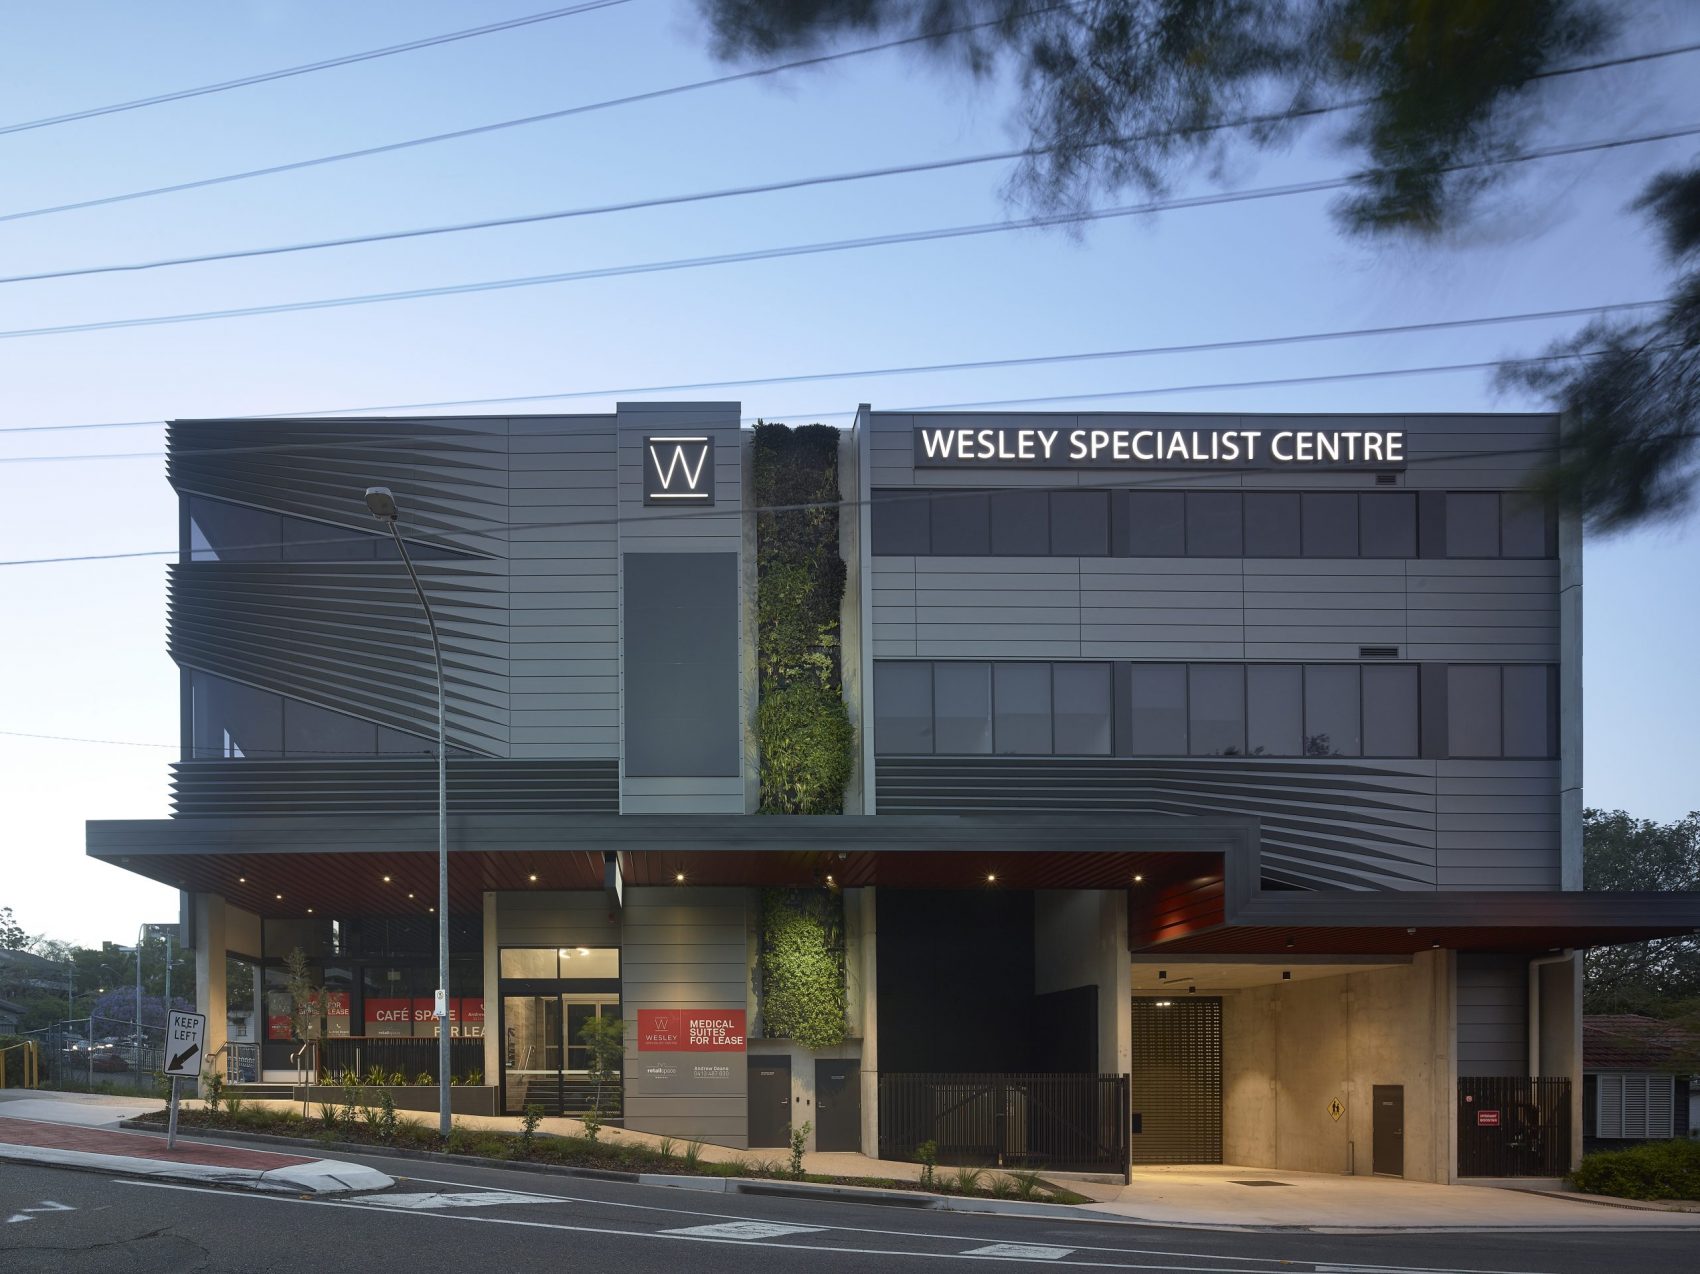 WESLEY SPECIALIST CENTRE BY CLEMENTS CLARKE ARCHITECT | Featured image for the Building Design Management Service page from Clements Clarke Architects.